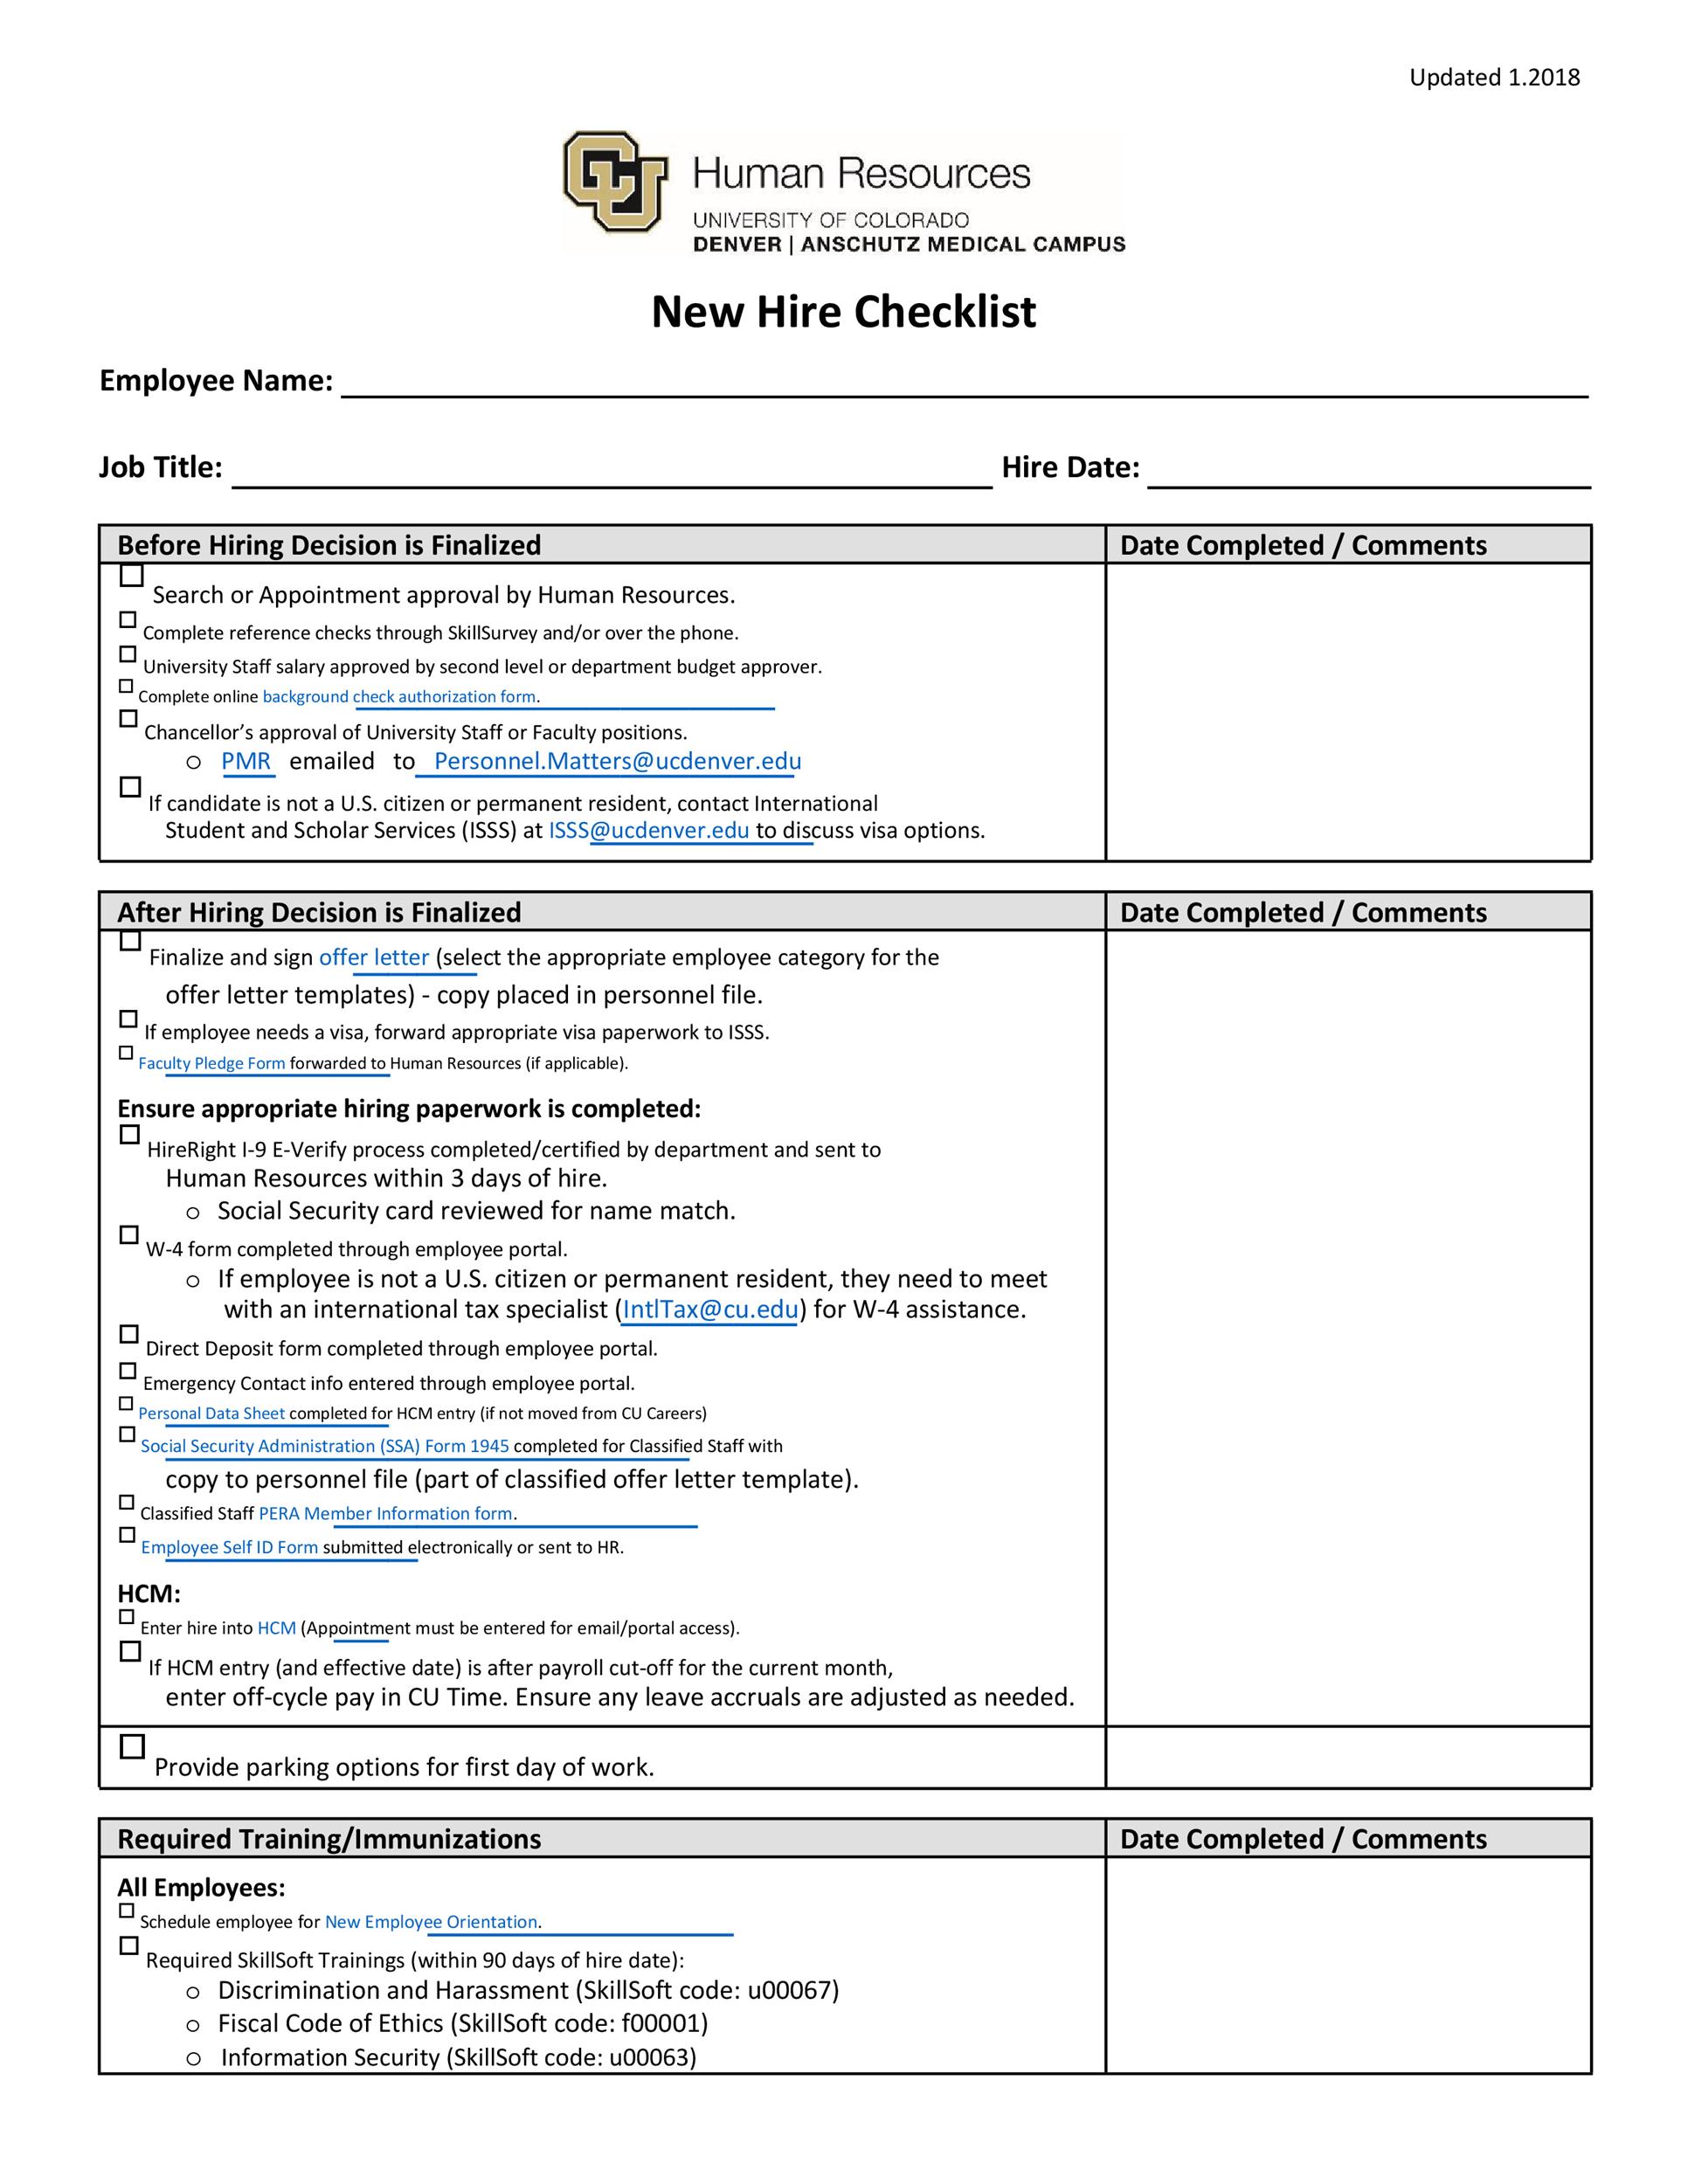 Free New Hire Checklist Template from templatelab.com